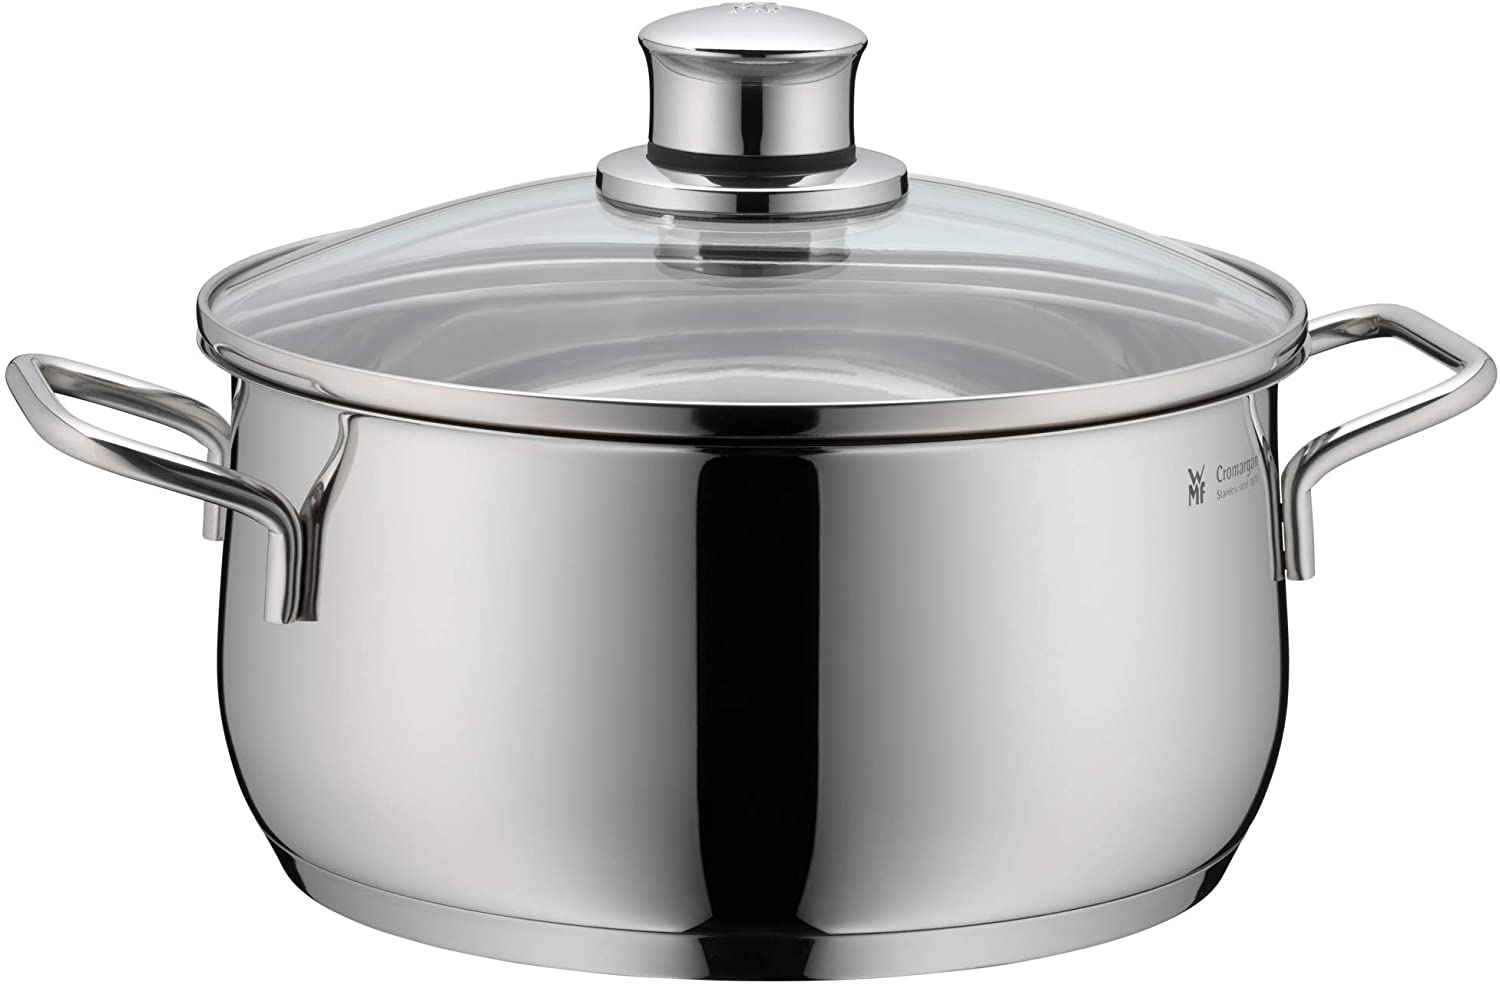 WMF Diadem Plus Low Casserole with Lid, 18/10 Stainless Steel, 16 cm